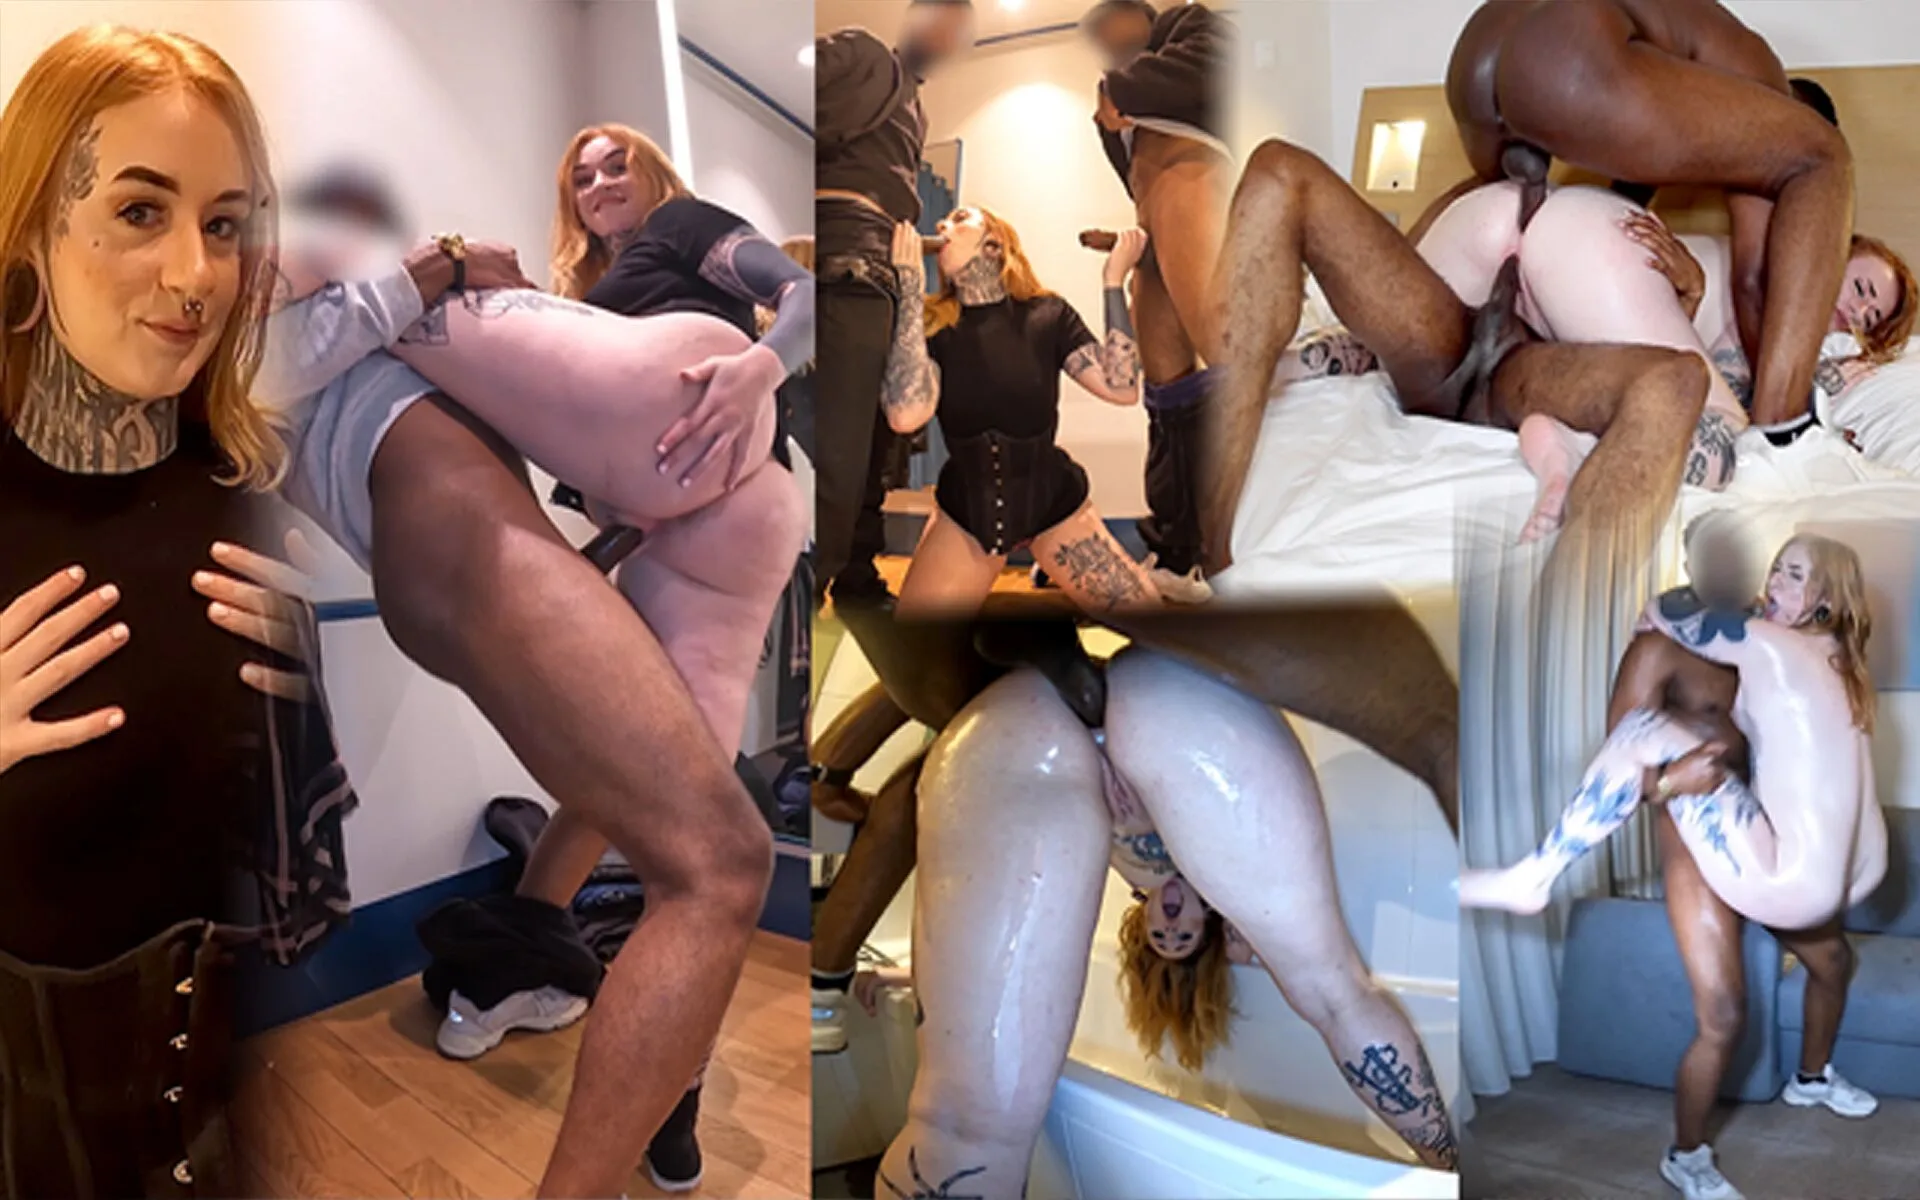 Big Ass British Student Gets Anal Fucked Hard in Fitting Room and Hotel Corridor by 2 Strangers!!! by Reels plans Faphouse picture